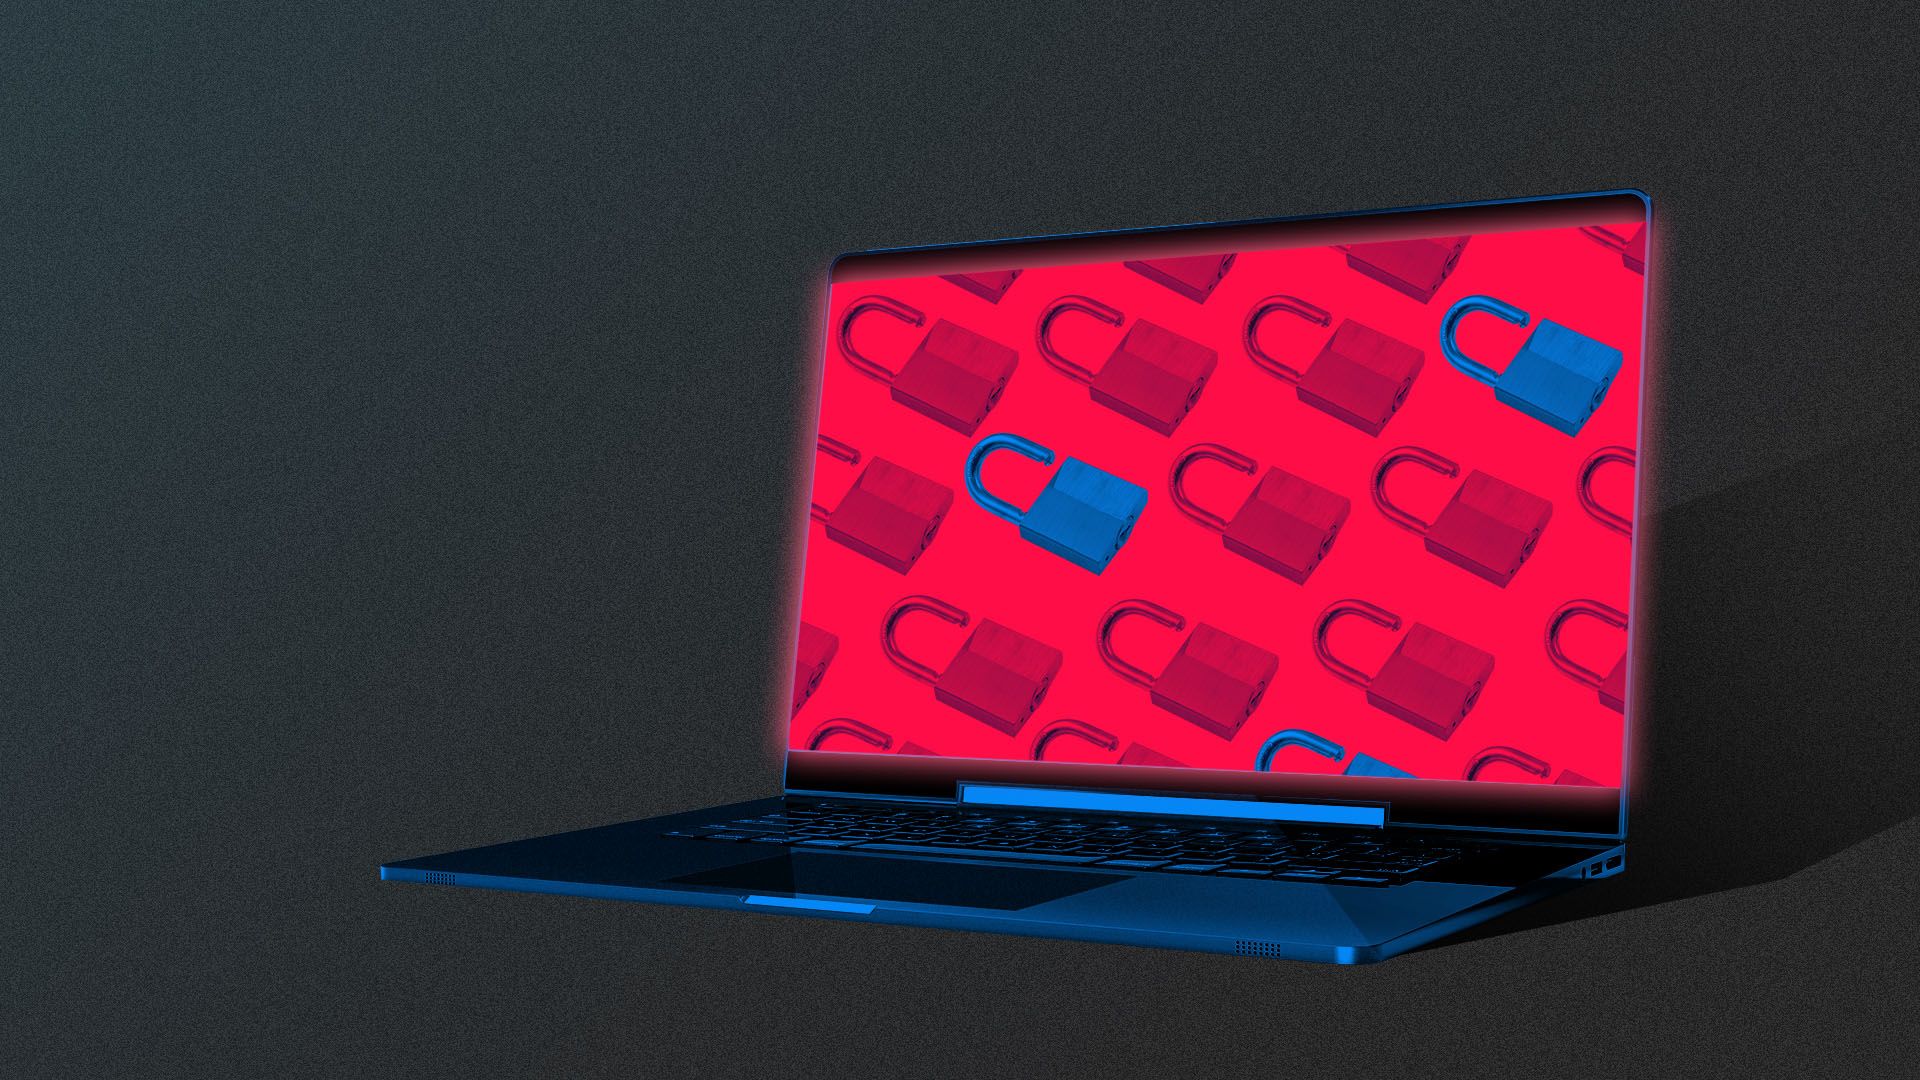 Illustration of a laptop with open locks all over the screen